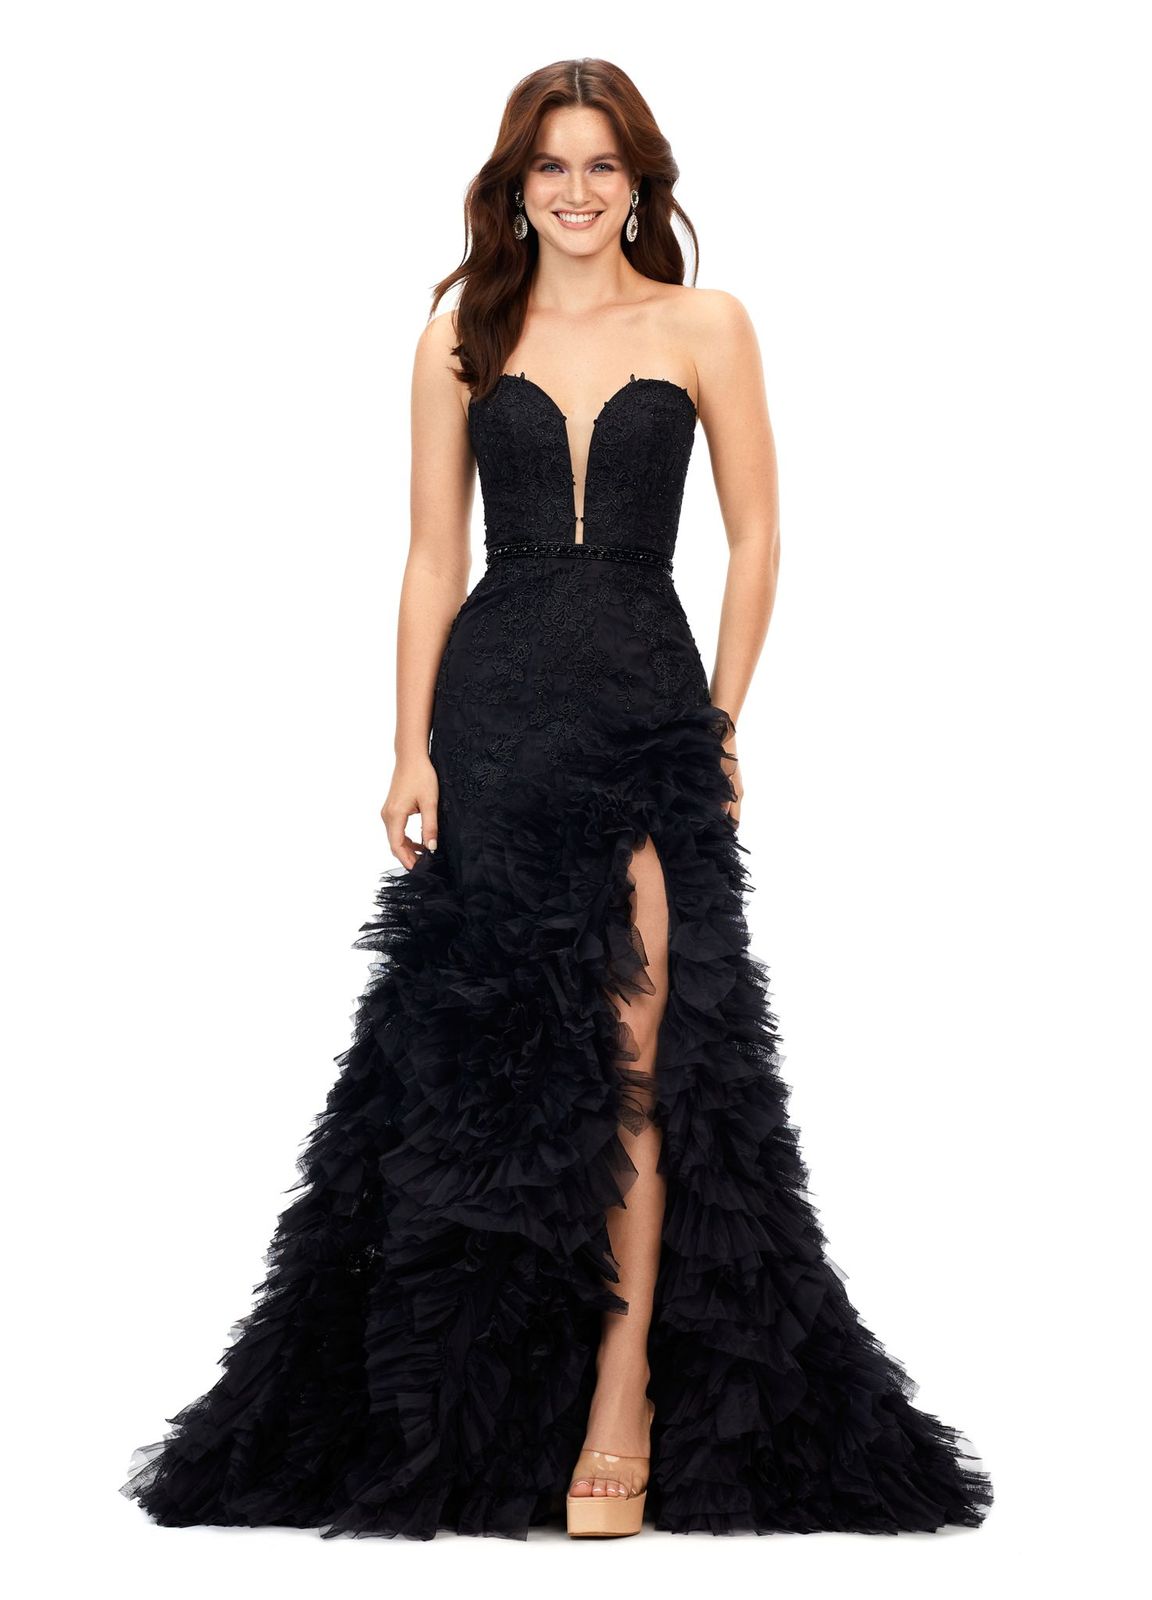 Ashley Lauren 11377 This luscious lace gown features lace applique scattered throughout the bodice, along with an embellished waistband. With its ruffle tulle skirt & sunken v-neckline, you are sure to turn heads! Sweetheart Neckline Heat Set Lace Appliques Ruffle Skirt Tulle COLORS: Black, Red